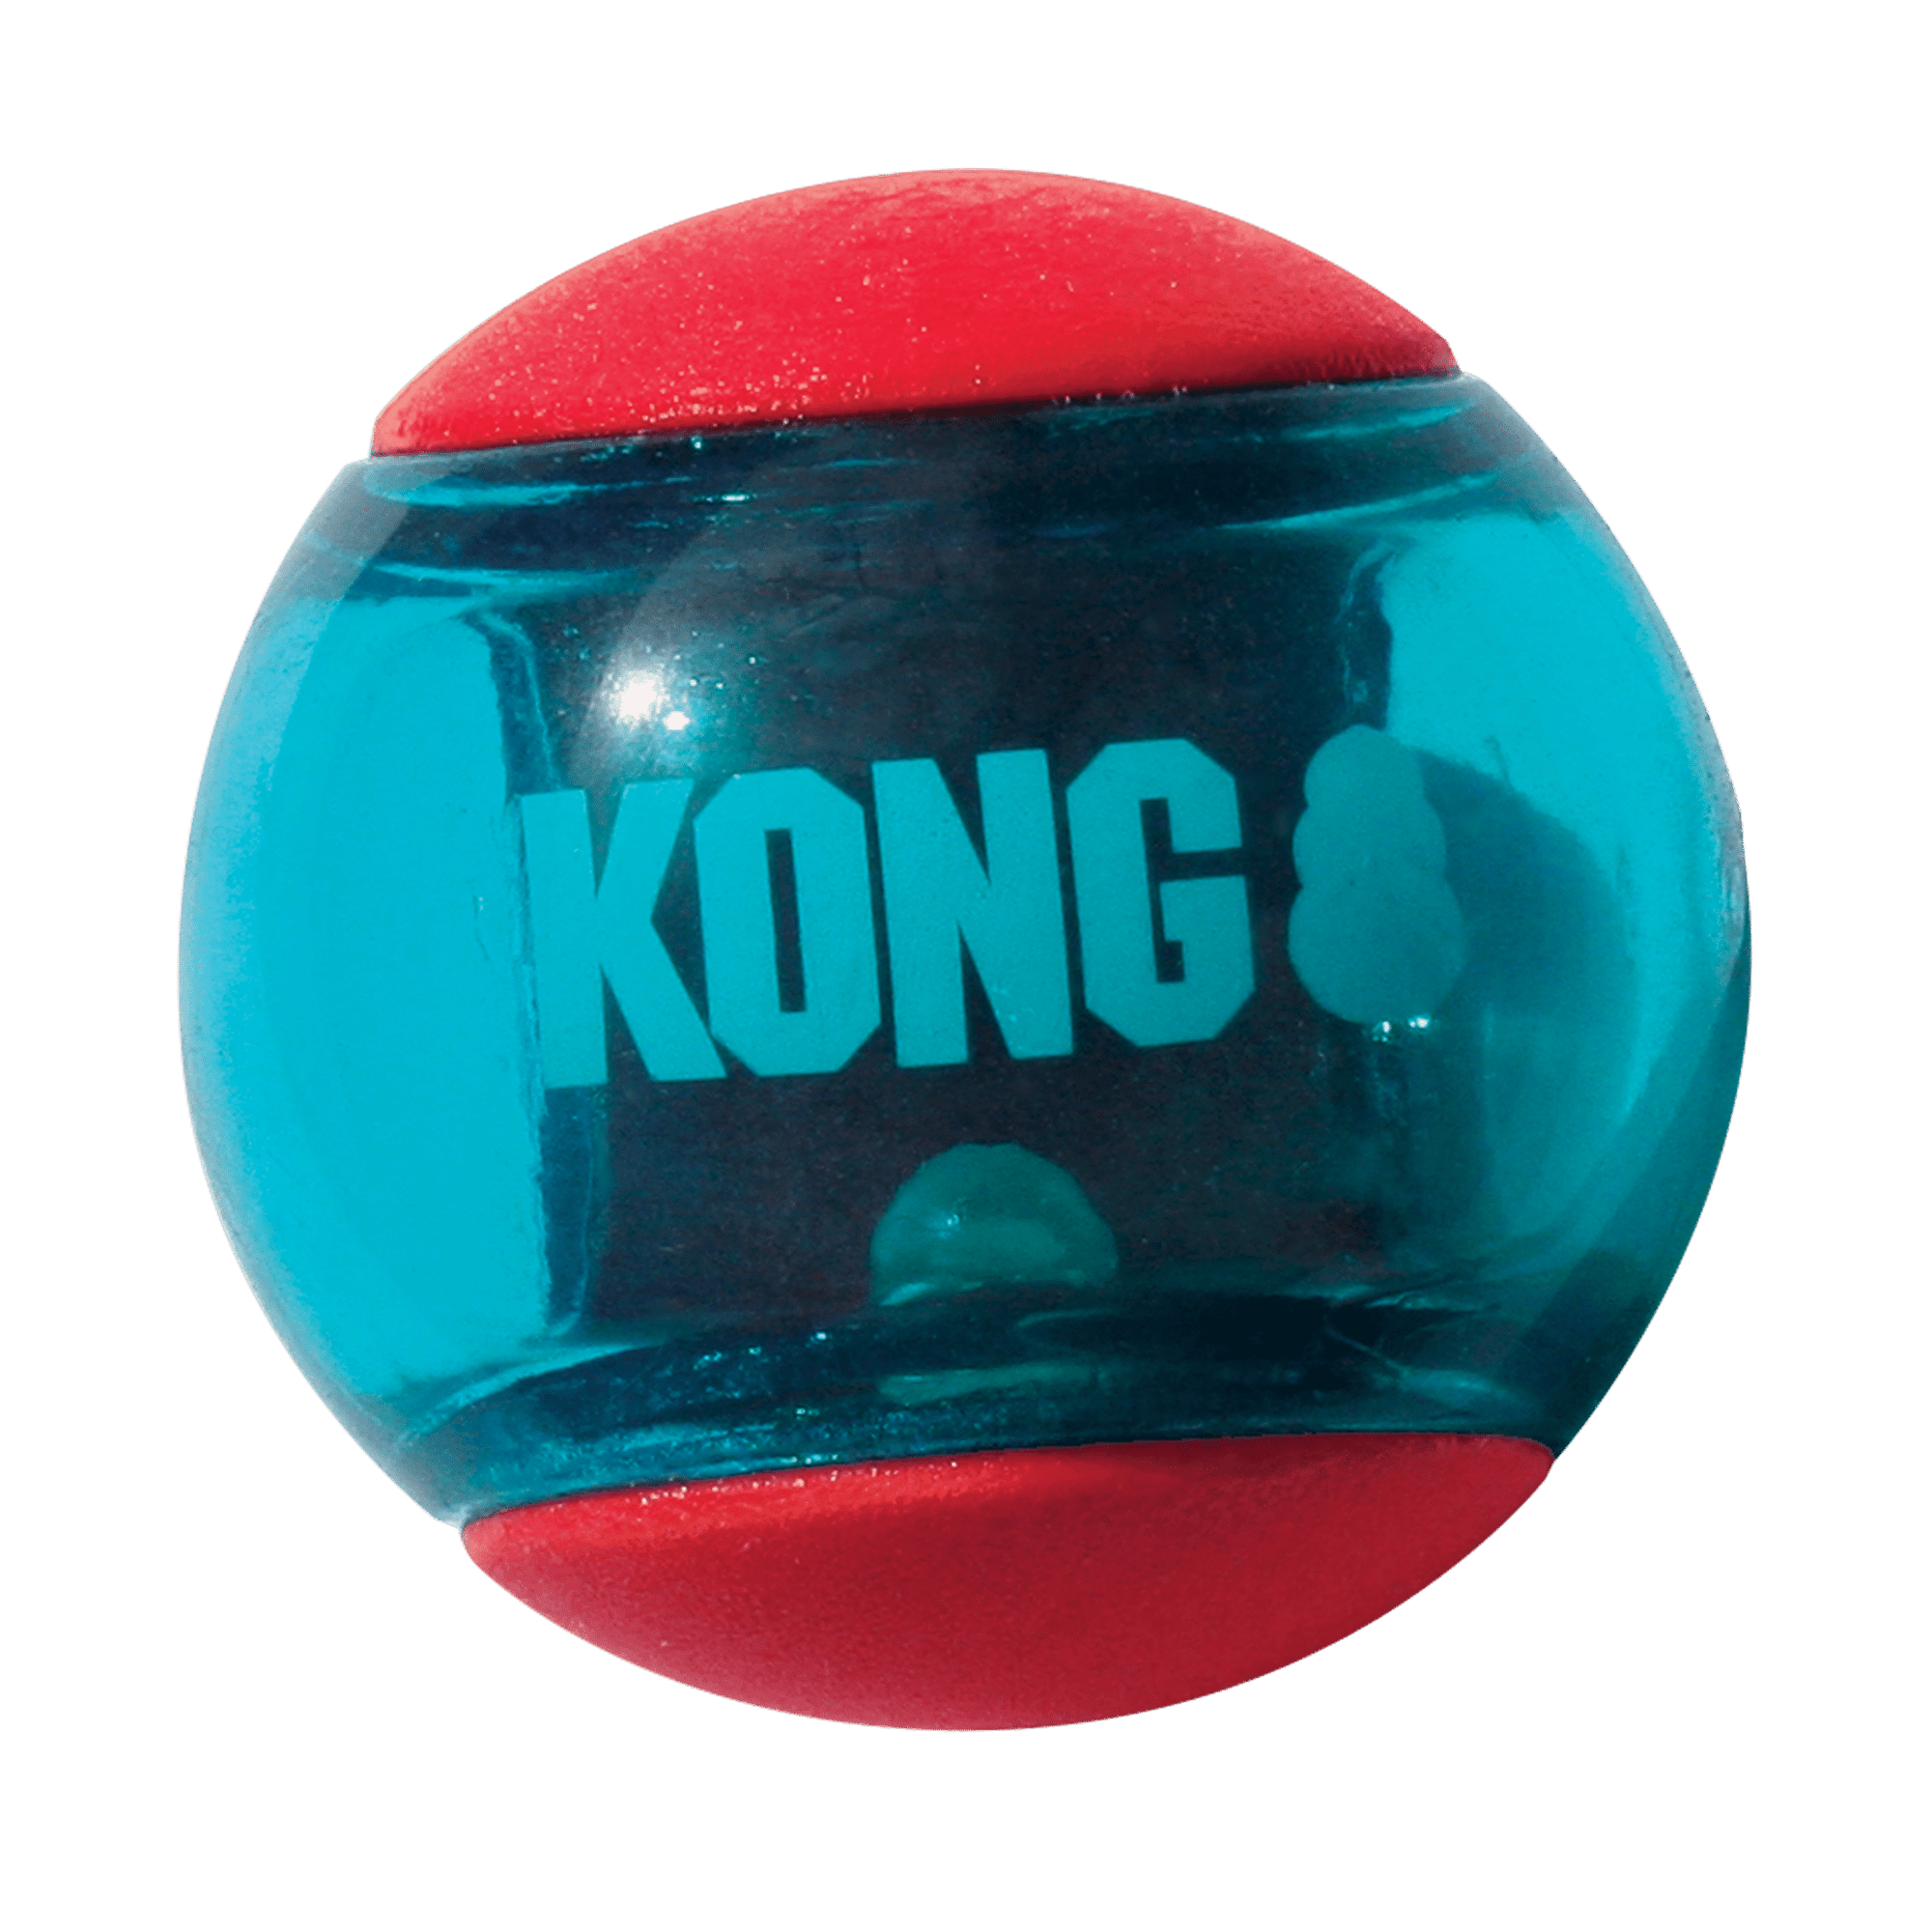 KONG Squeezz Action Ball Red Dog Toy, Kong, Medium